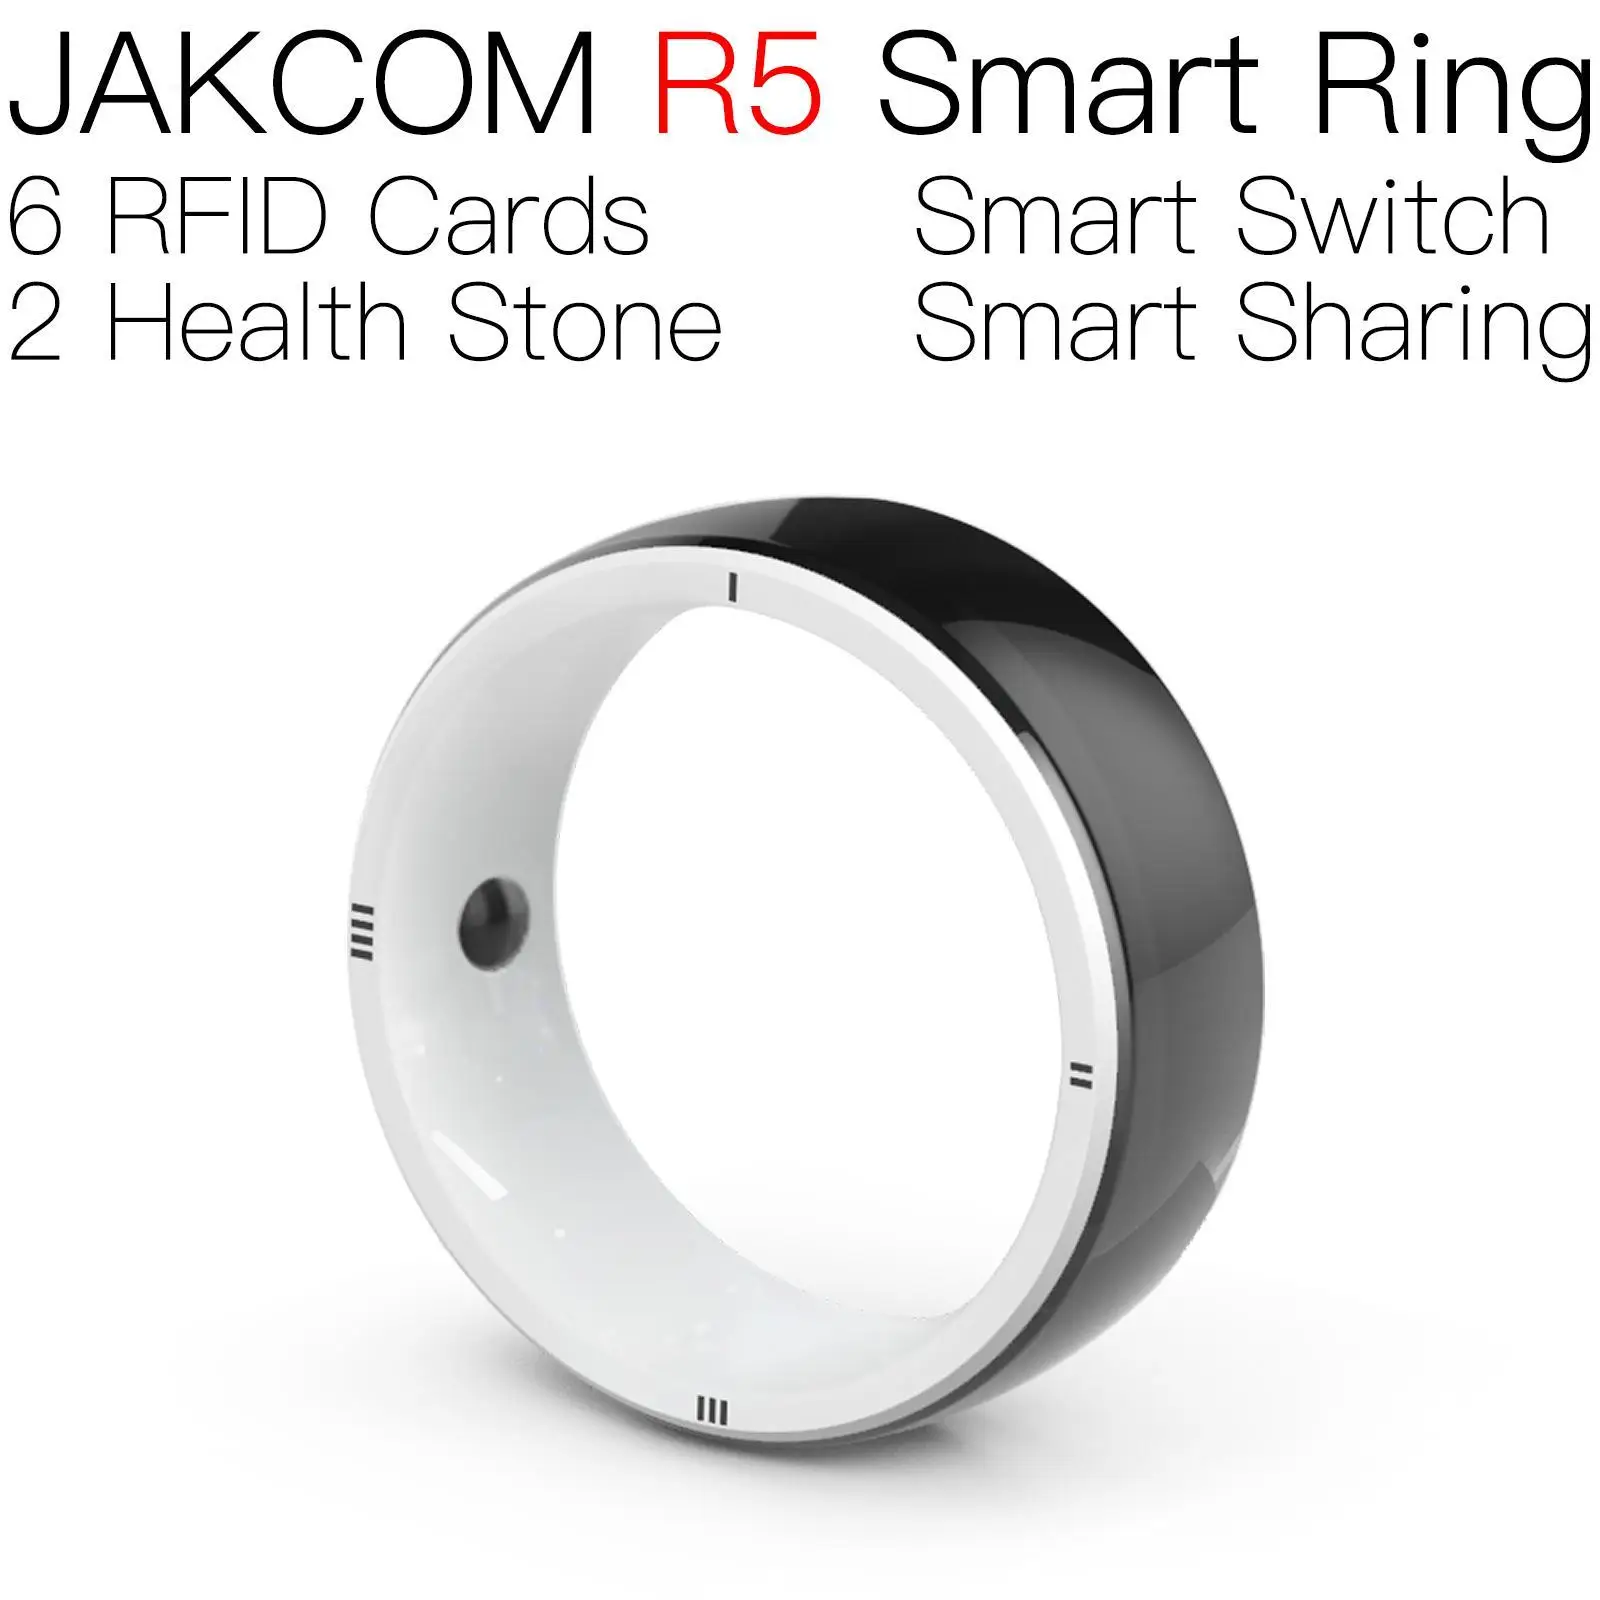 

JAKCOM R5 Smart Ring Nice than smart chip with nfc card rfid scanner pet post deck sticker para auto poodle 100pcs tag 215 s50